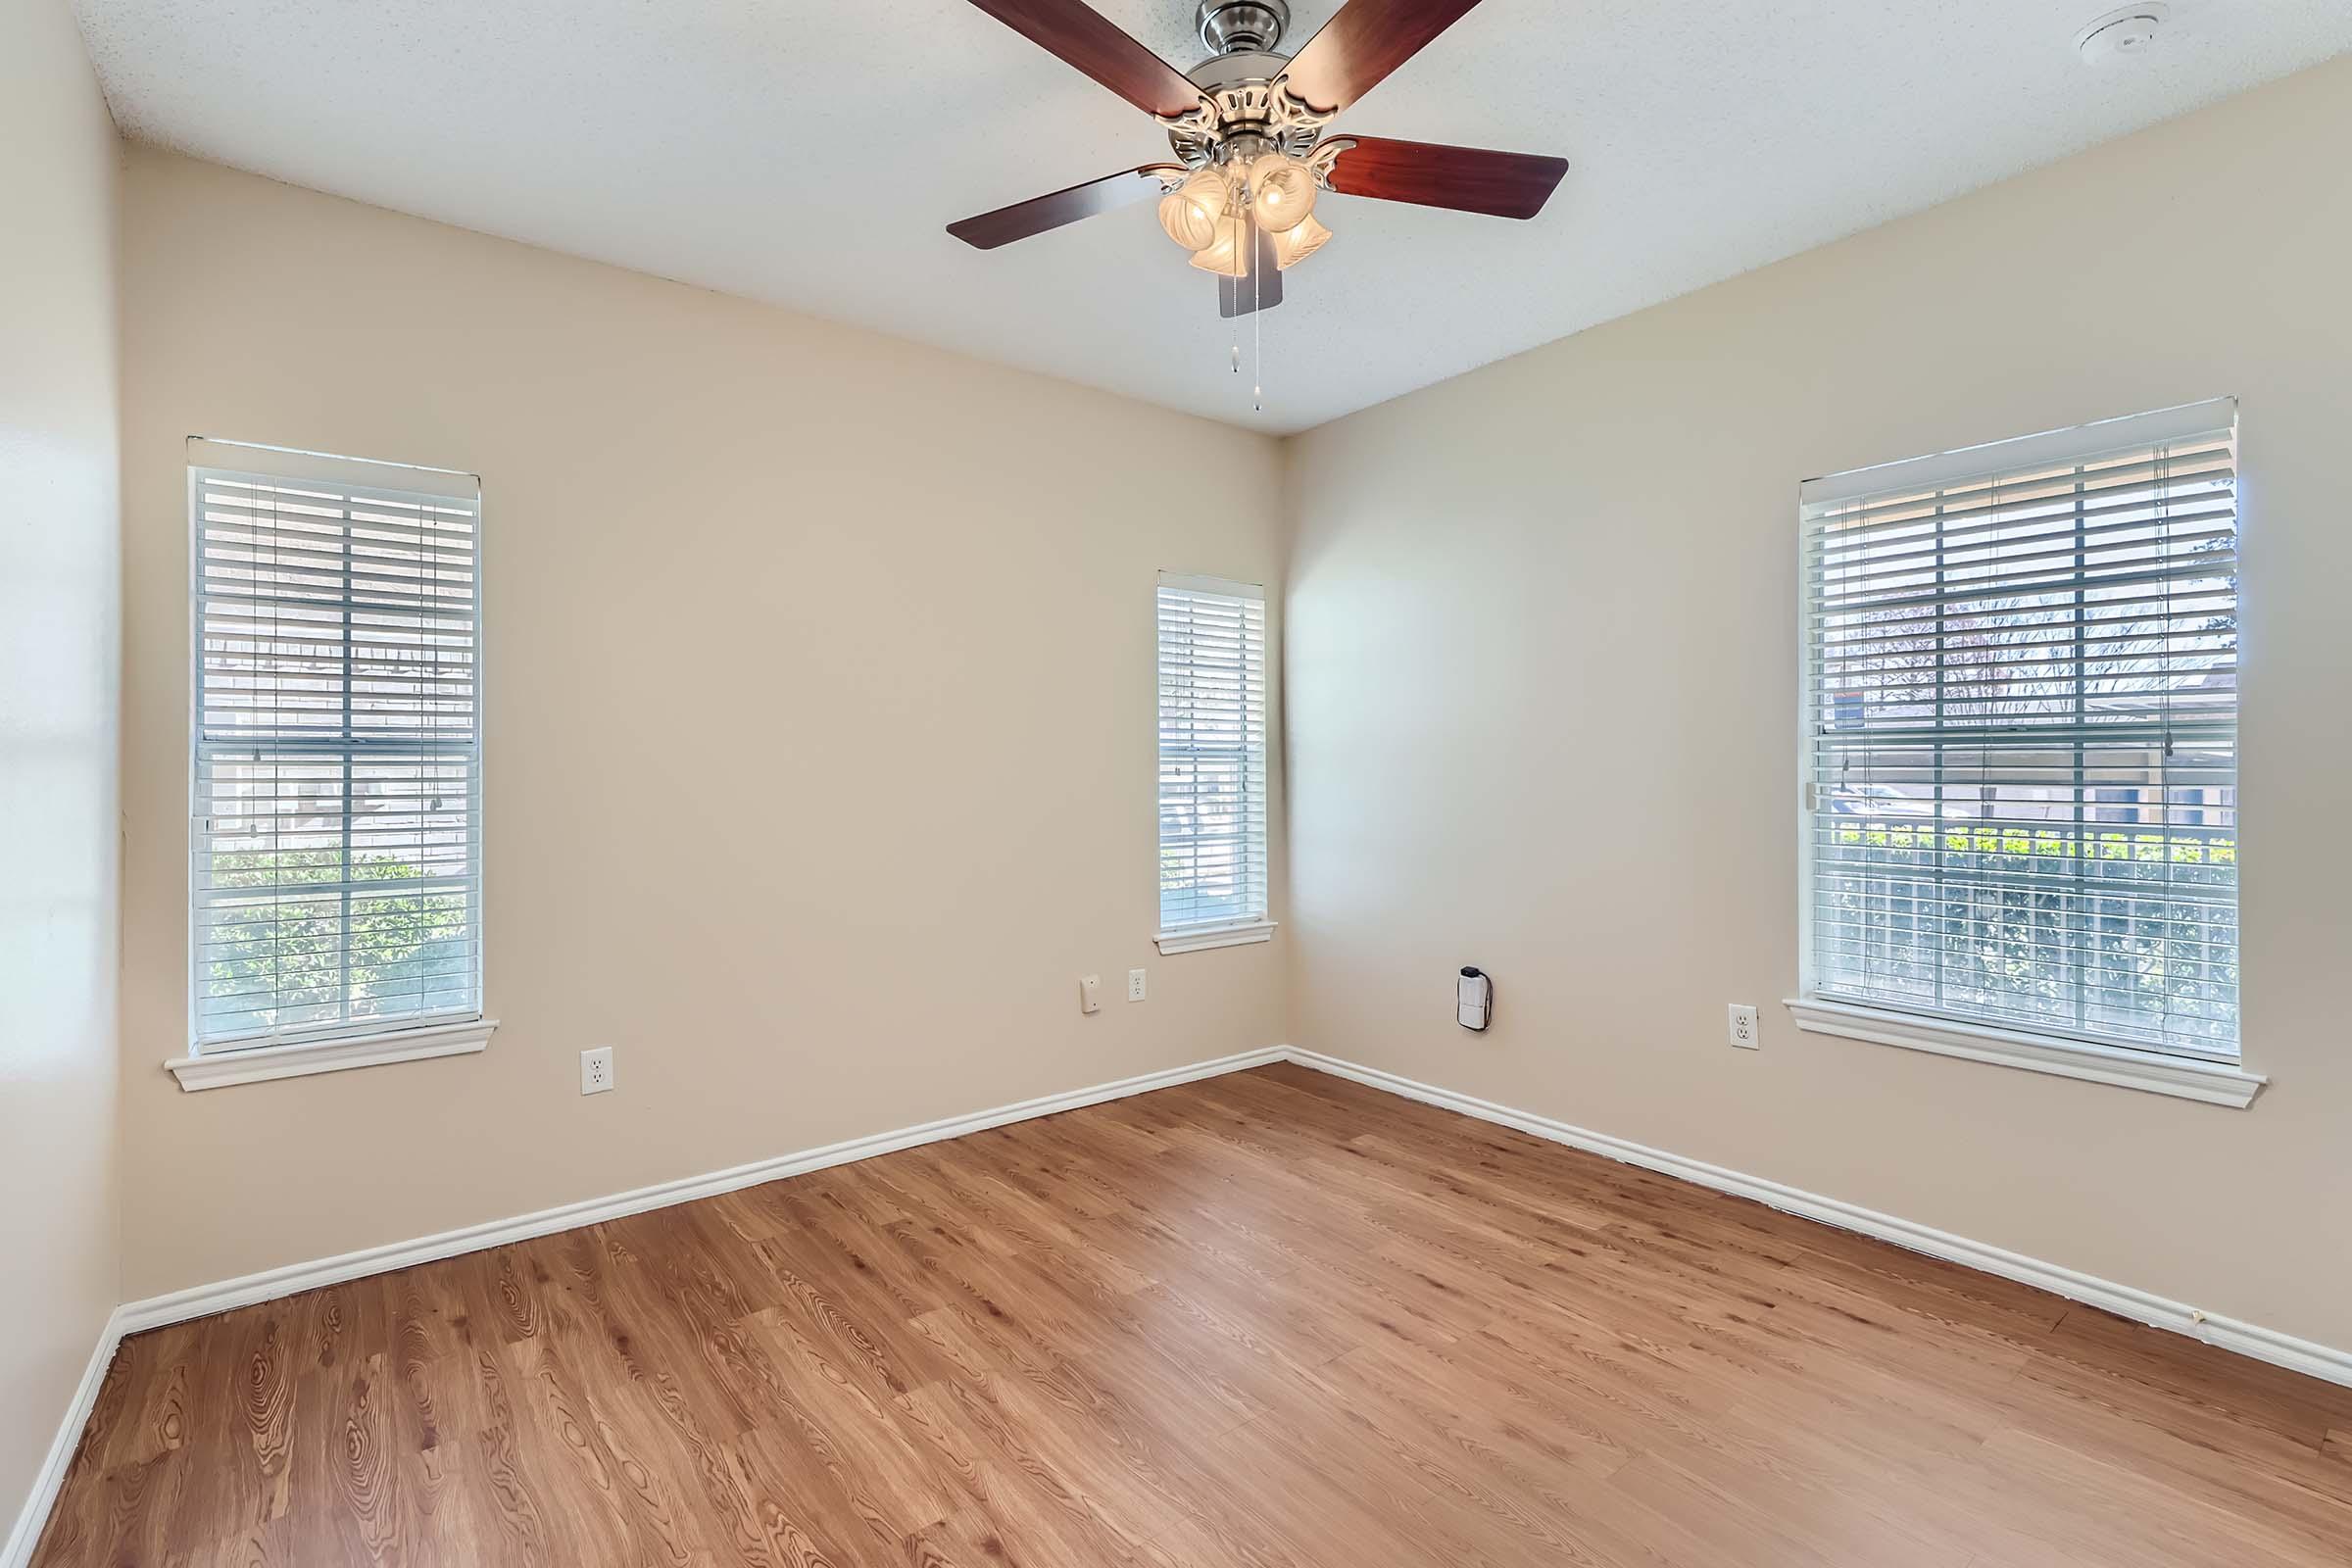 A living room at Rise Skyline with wood-style flooring, a ceiling fan, and windows. 